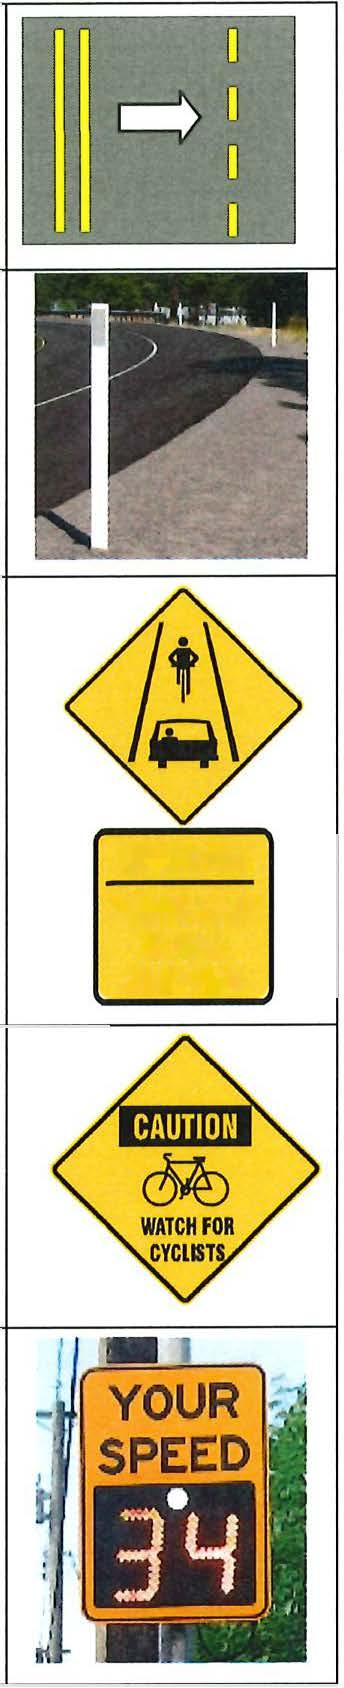 along curve "Single File" Sign age (8 signs in each direction) SINGLE FILE CHANGE LANES TO PASS WHEN SAFE